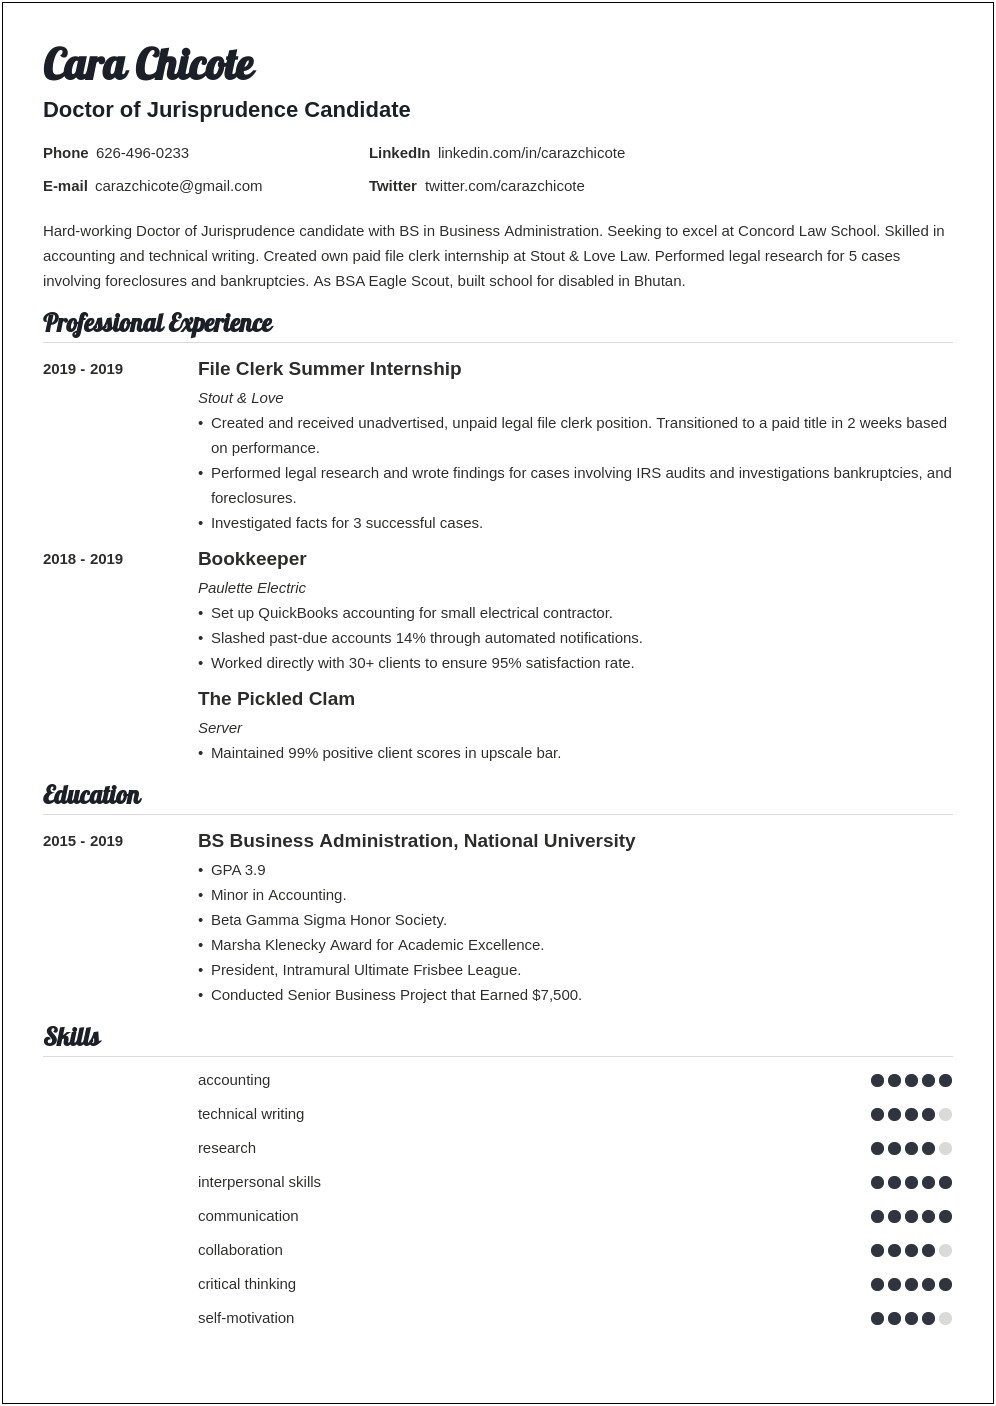 Skills To Include On Law School Resume